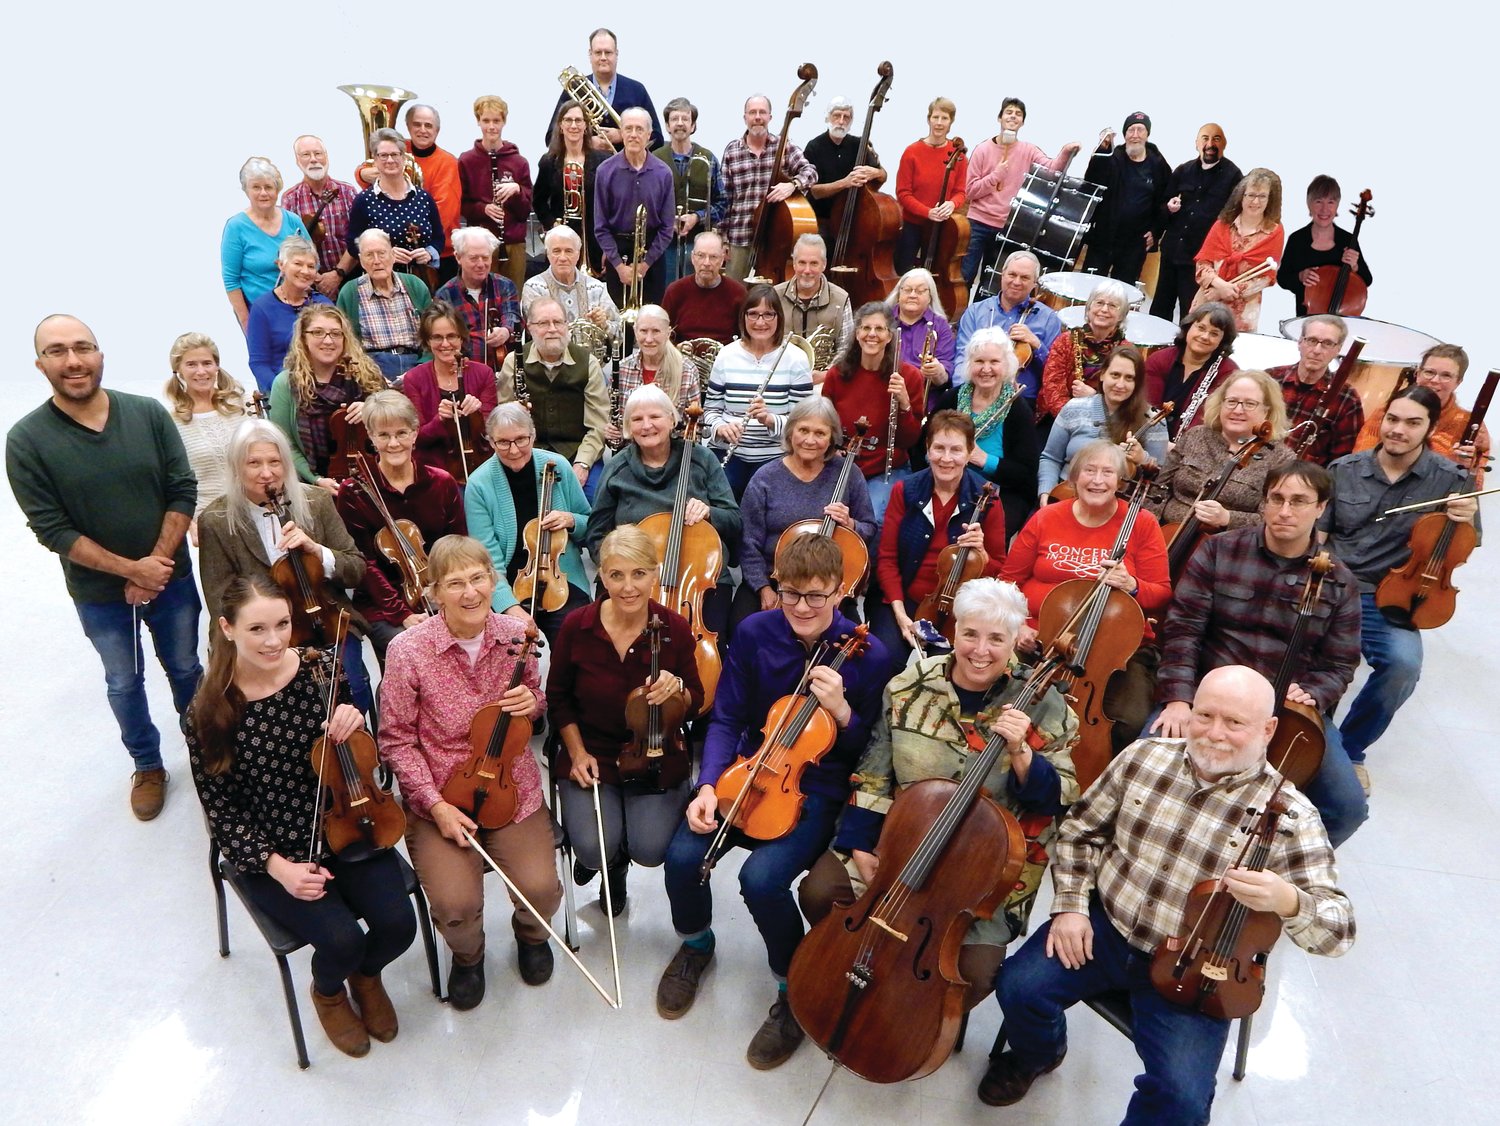 The Port Townsend Symphony Orchestra was founded in 1987, and has evolved over time to give local musicians of all ages and skill levels the opportunity to play together under the leadership of Tigran Arakelyan.